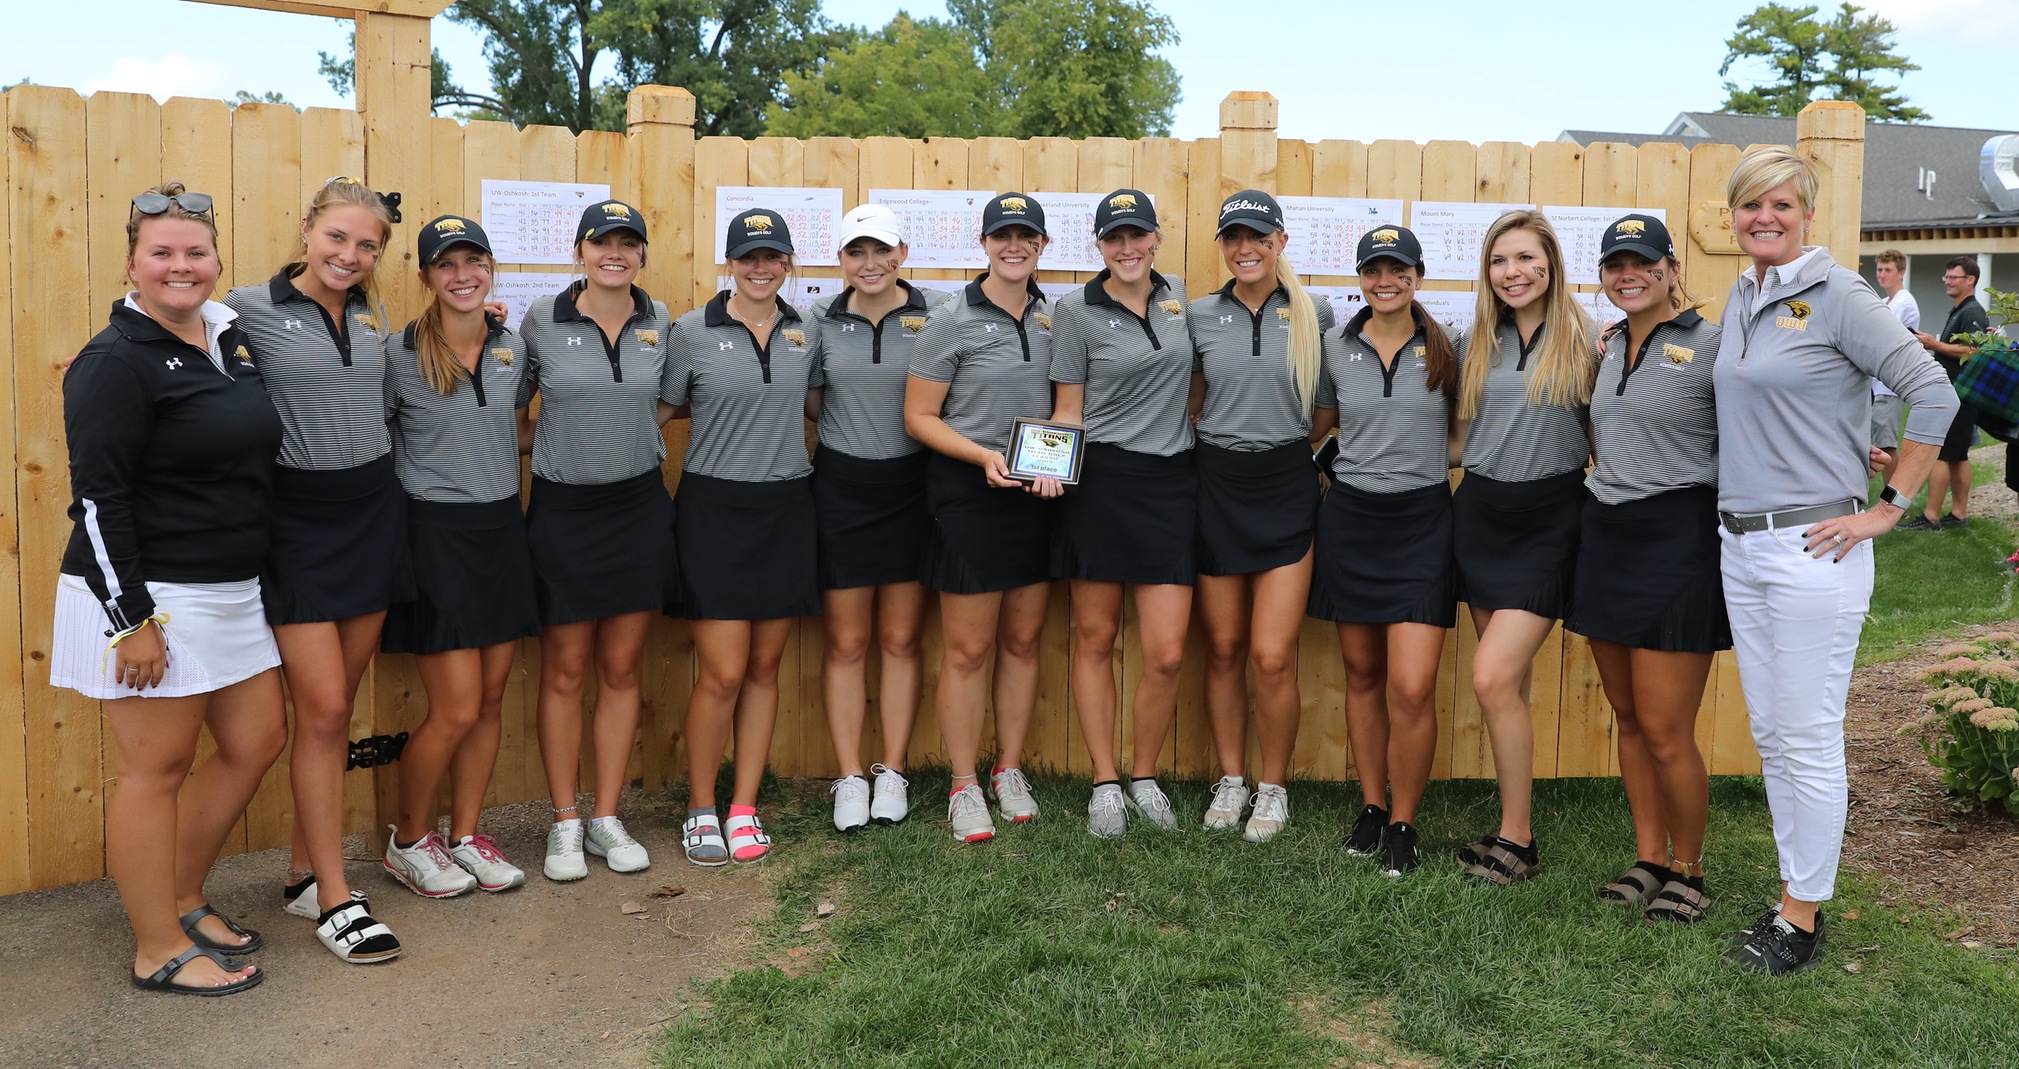 UW-Oshkosh earned first and third place in the team competition at this year's Titan Fall Classic.